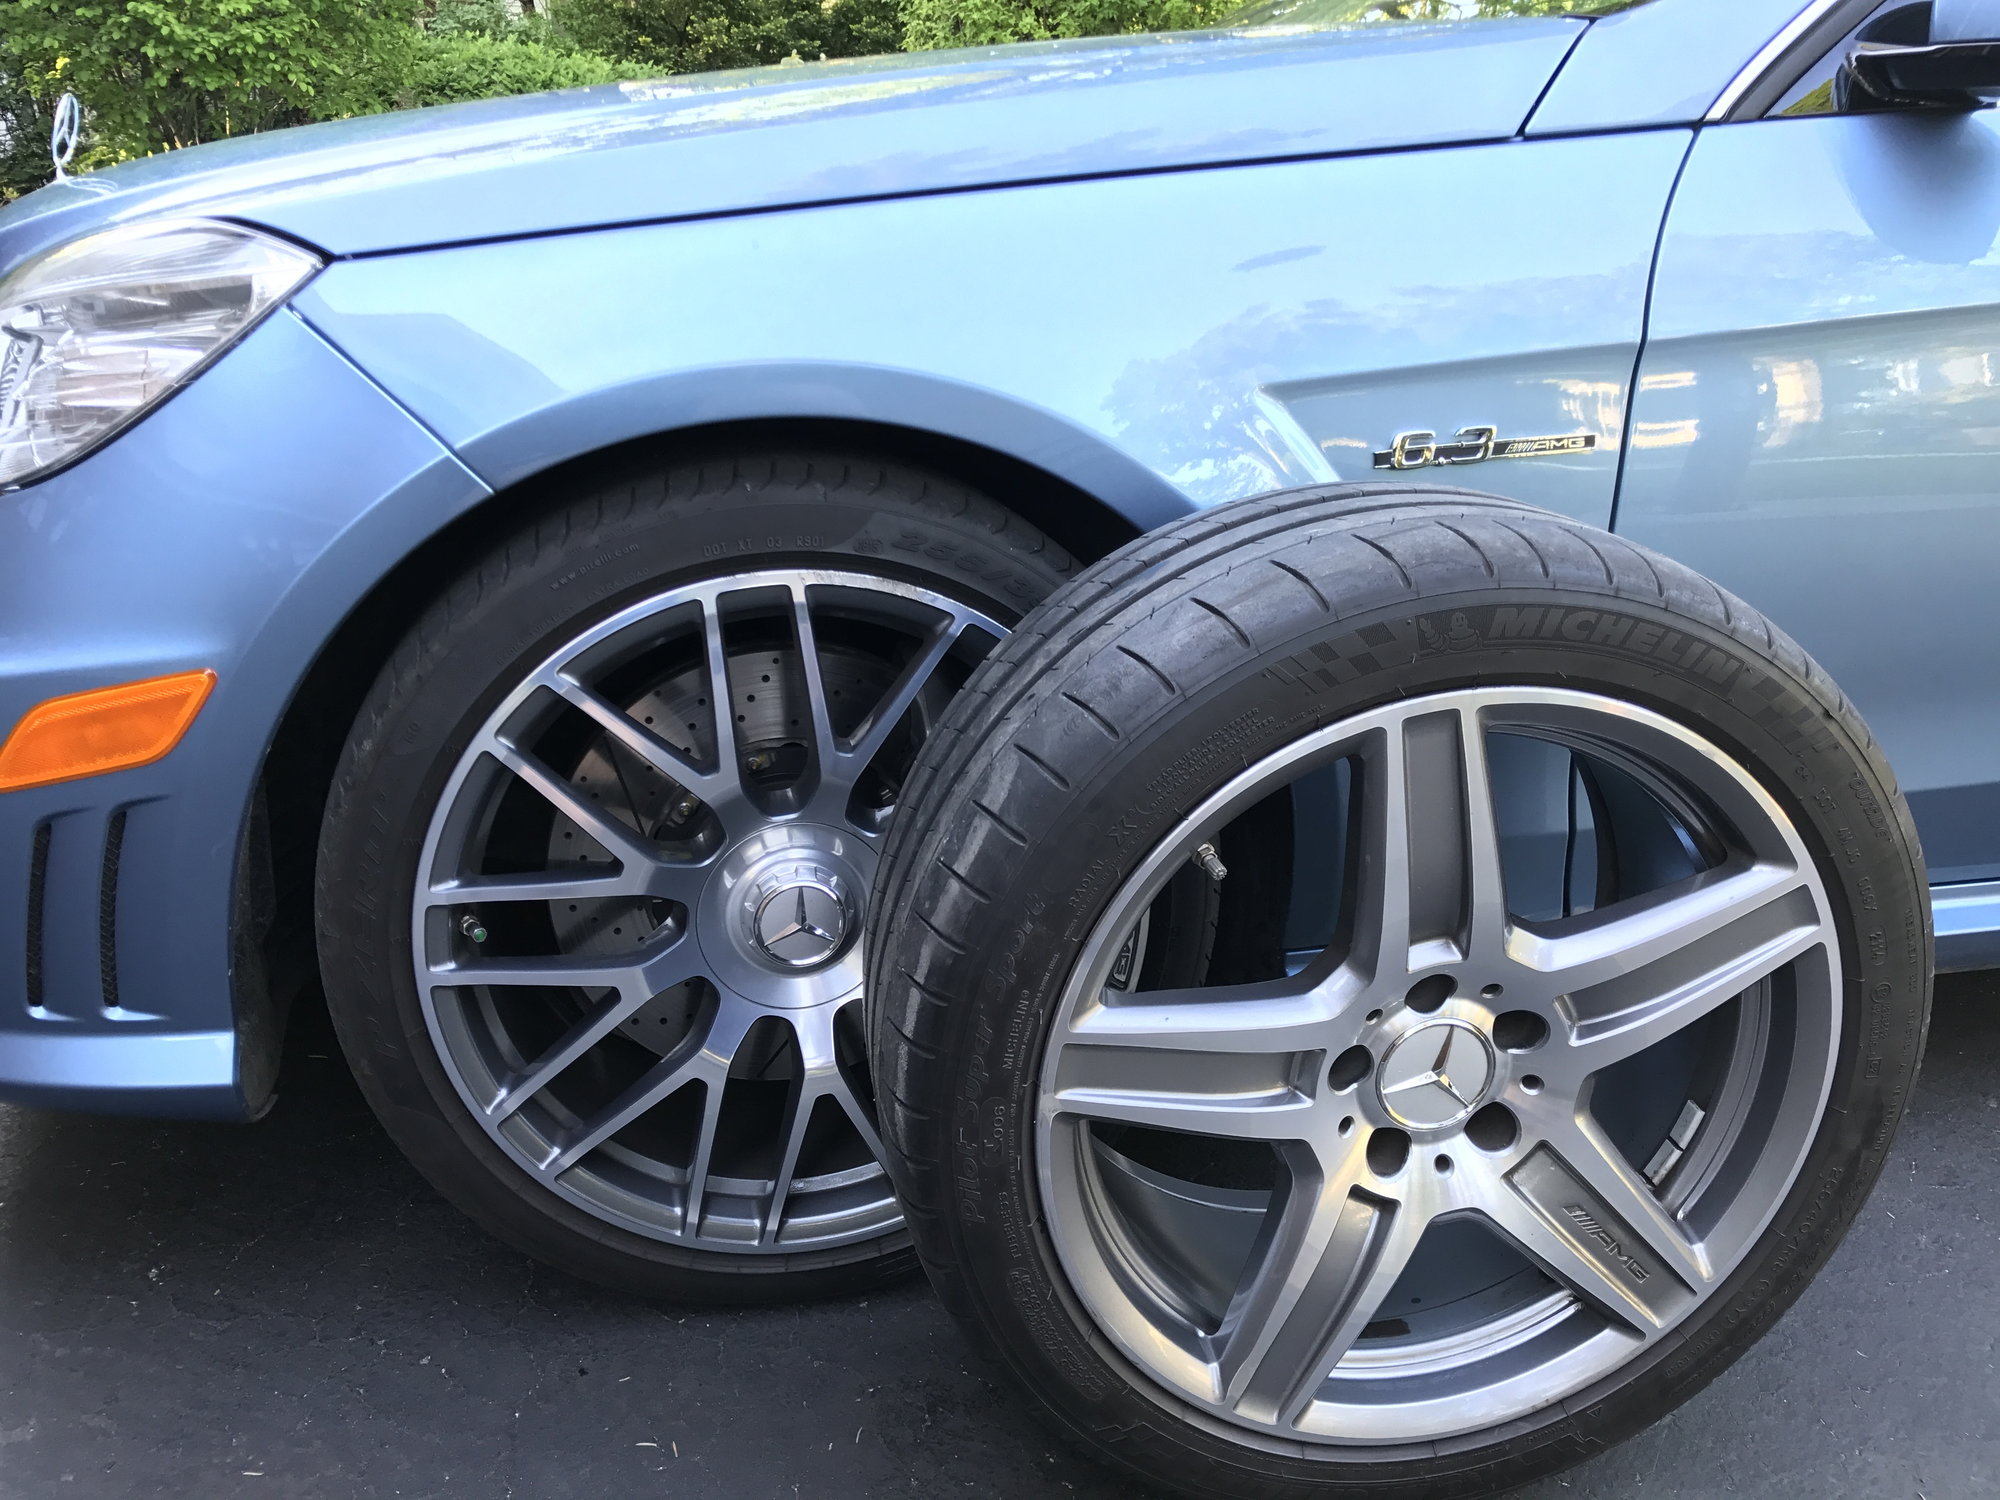 Wheels and Tires/Axles - W212 E63 18 Inch OEM Rims and Michelin Tires - Very Good Condition - Used - 2011 to 2017 Mercedes-Benz E63 AMG - Chicago, IL 60521, United States